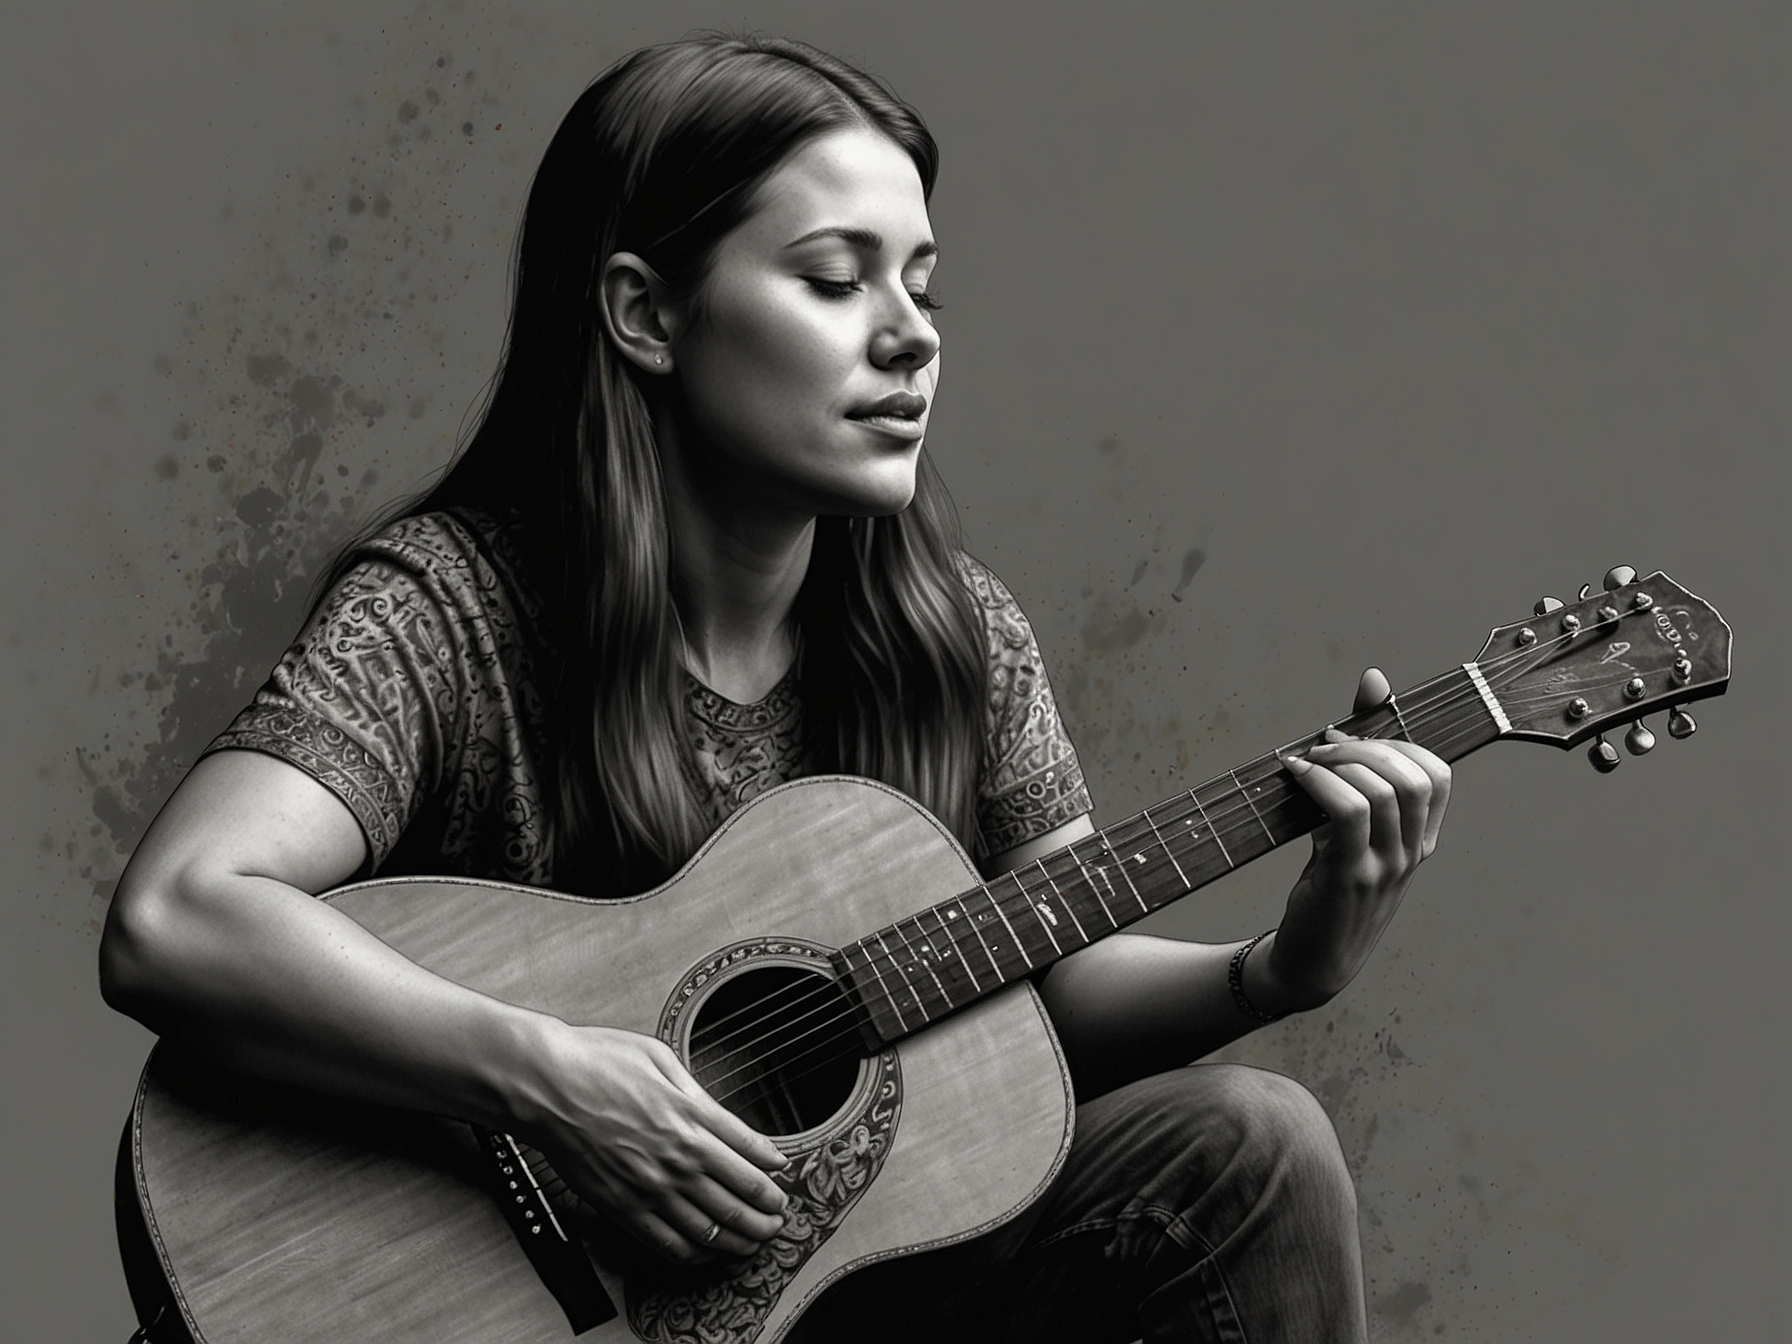 Ella Hooper passionately strumming her cherished acoustic guitar, reflecting on its role in her music career since her landmark days with Killing Heidi and into her solo ventures.